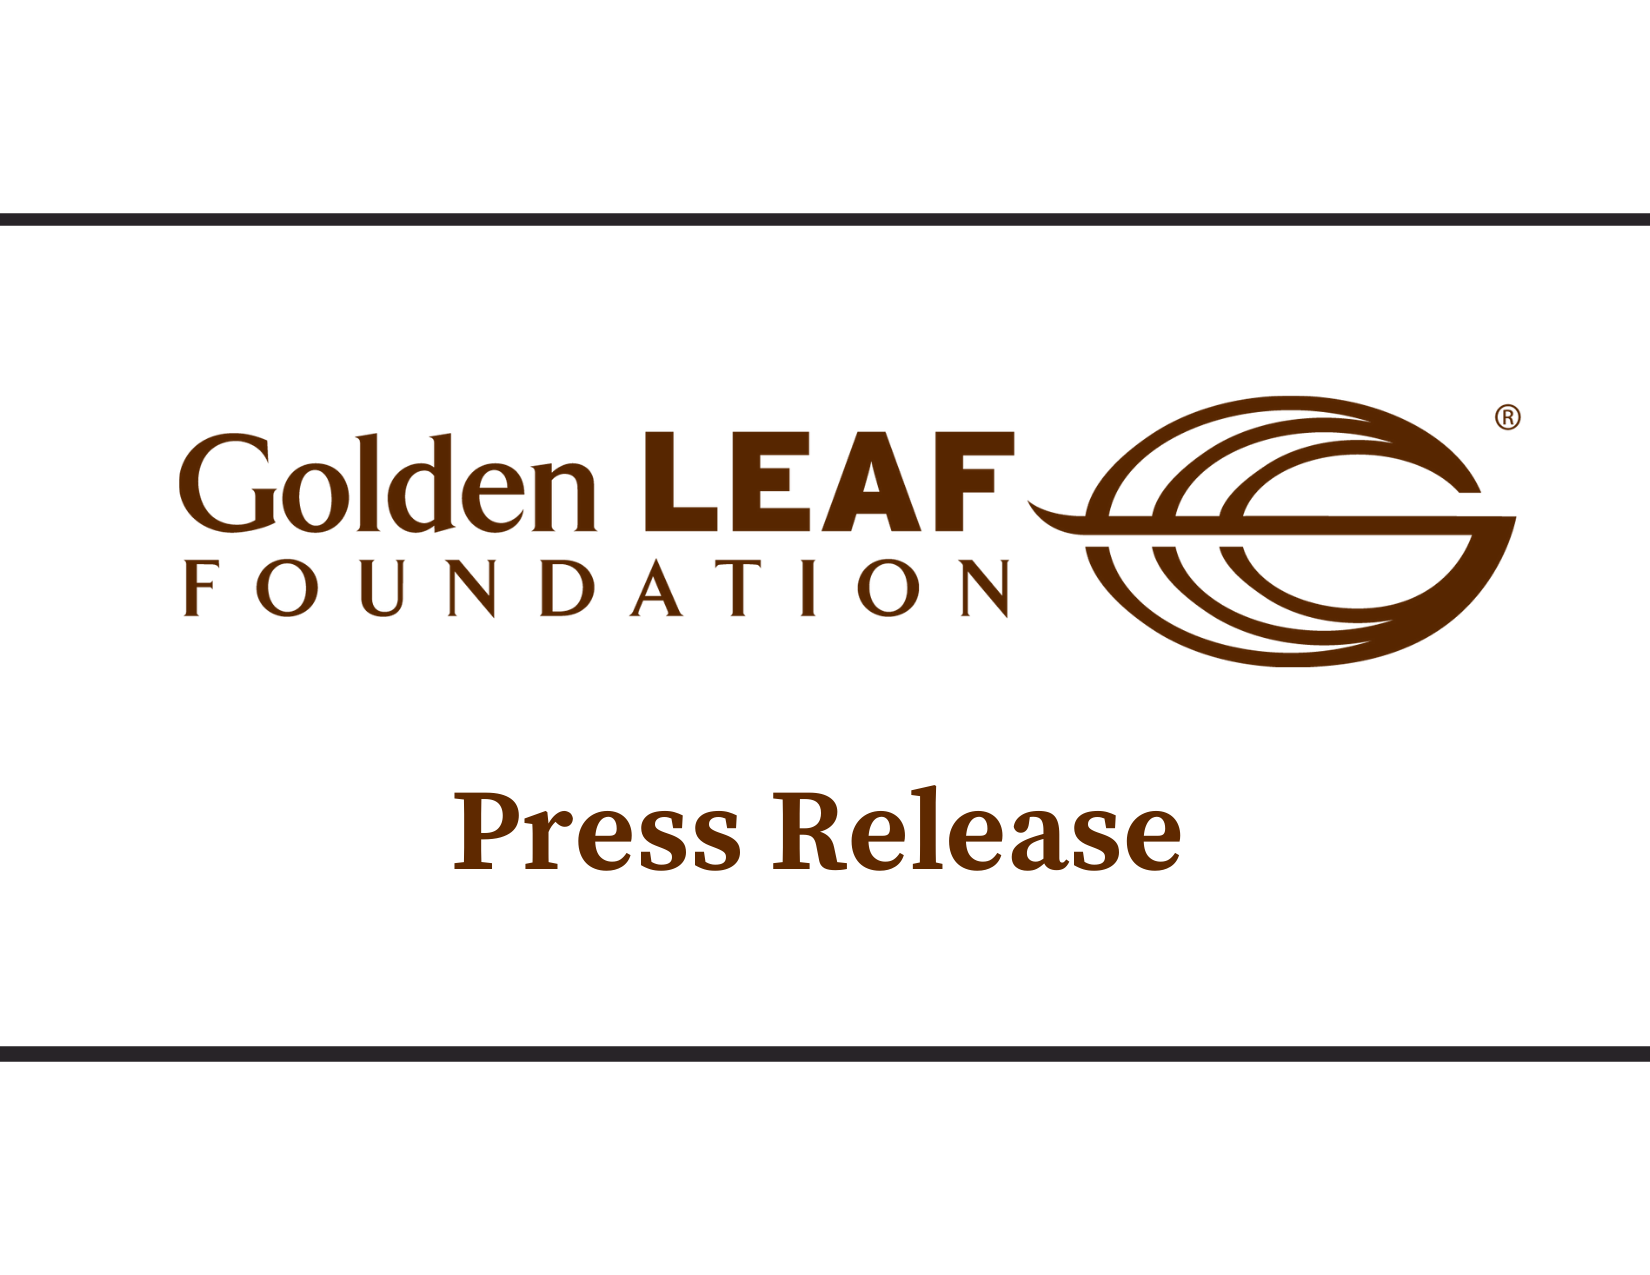 Applications for 4-Year Golden LEAF Scholarship due March 1, 2021